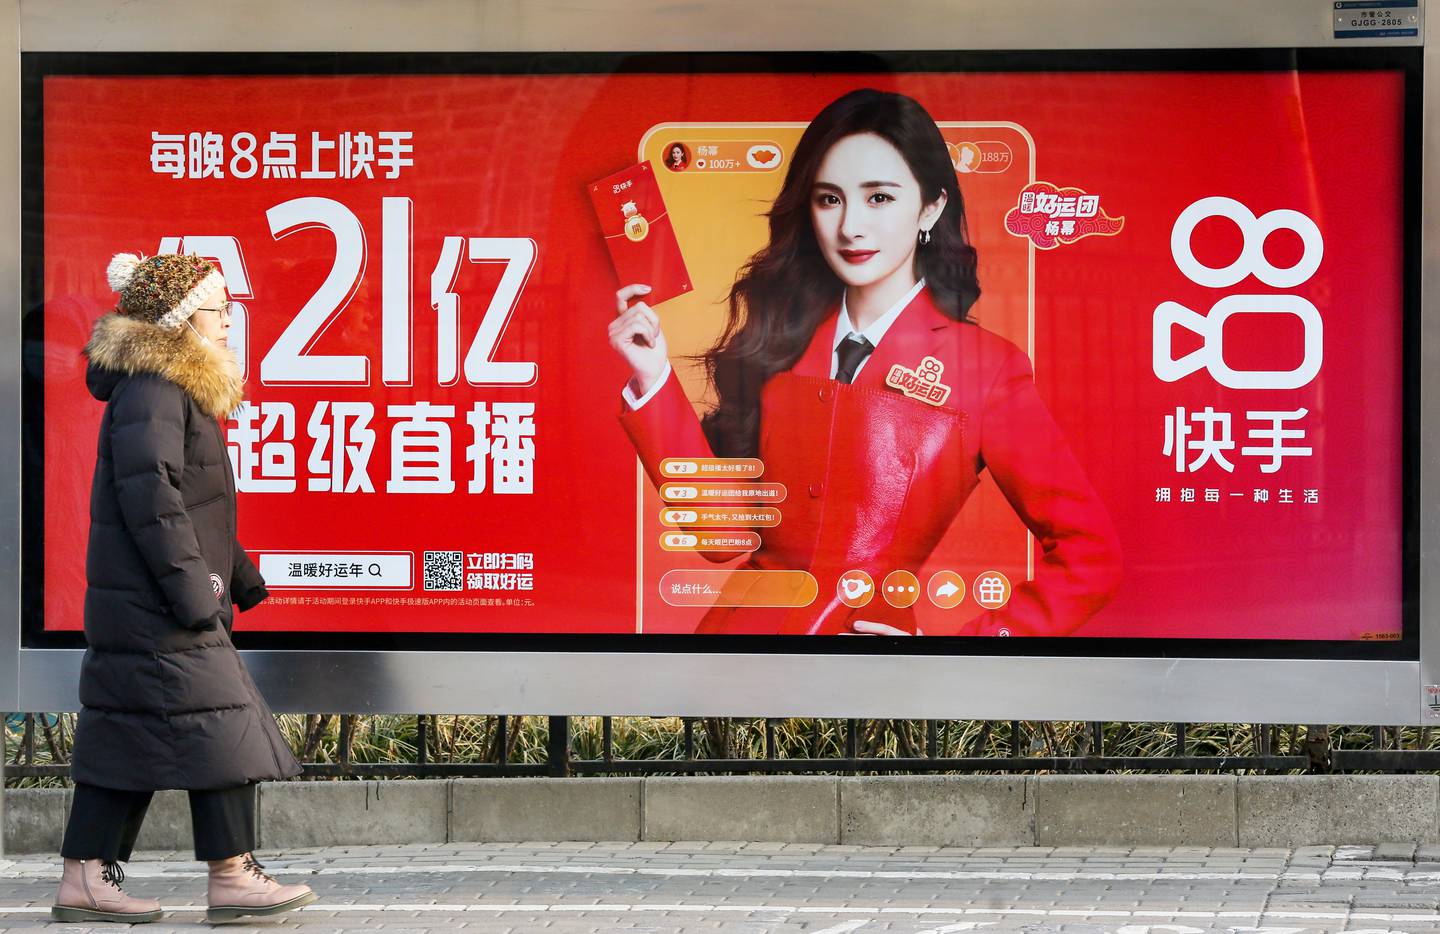 A billboard advertising Chinese short video app Kuaishou in Beijing, China. Getty Images.